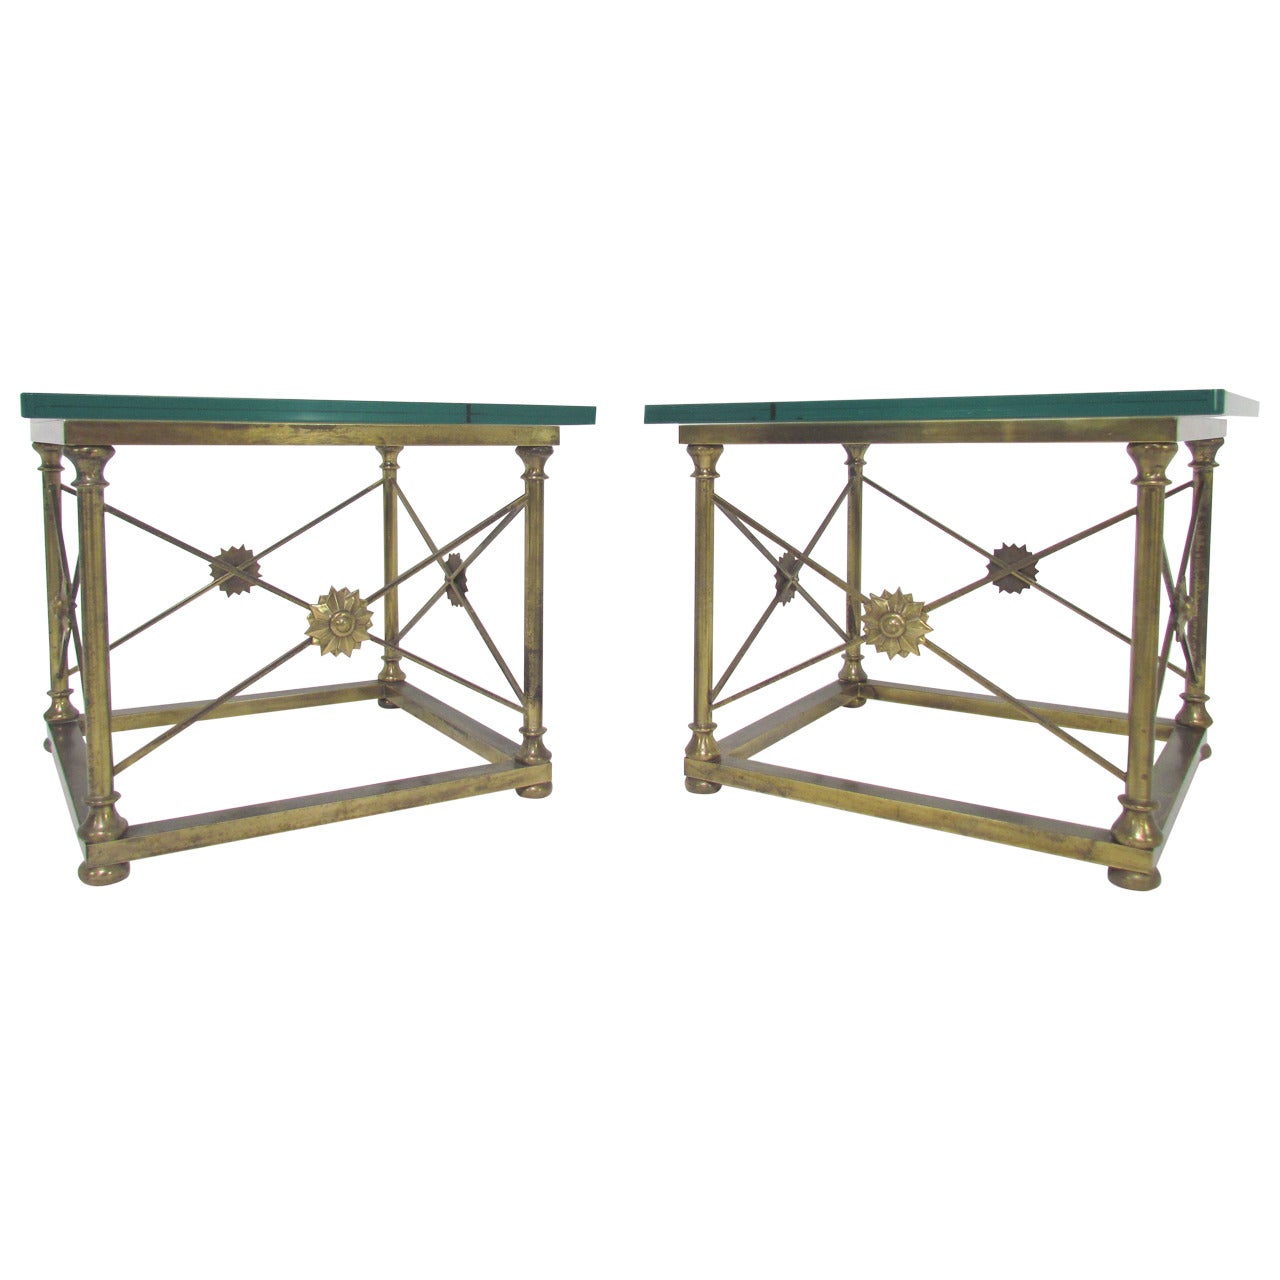 Pair of Hollywood Regency Italian Brass End Tables by Mastercraft